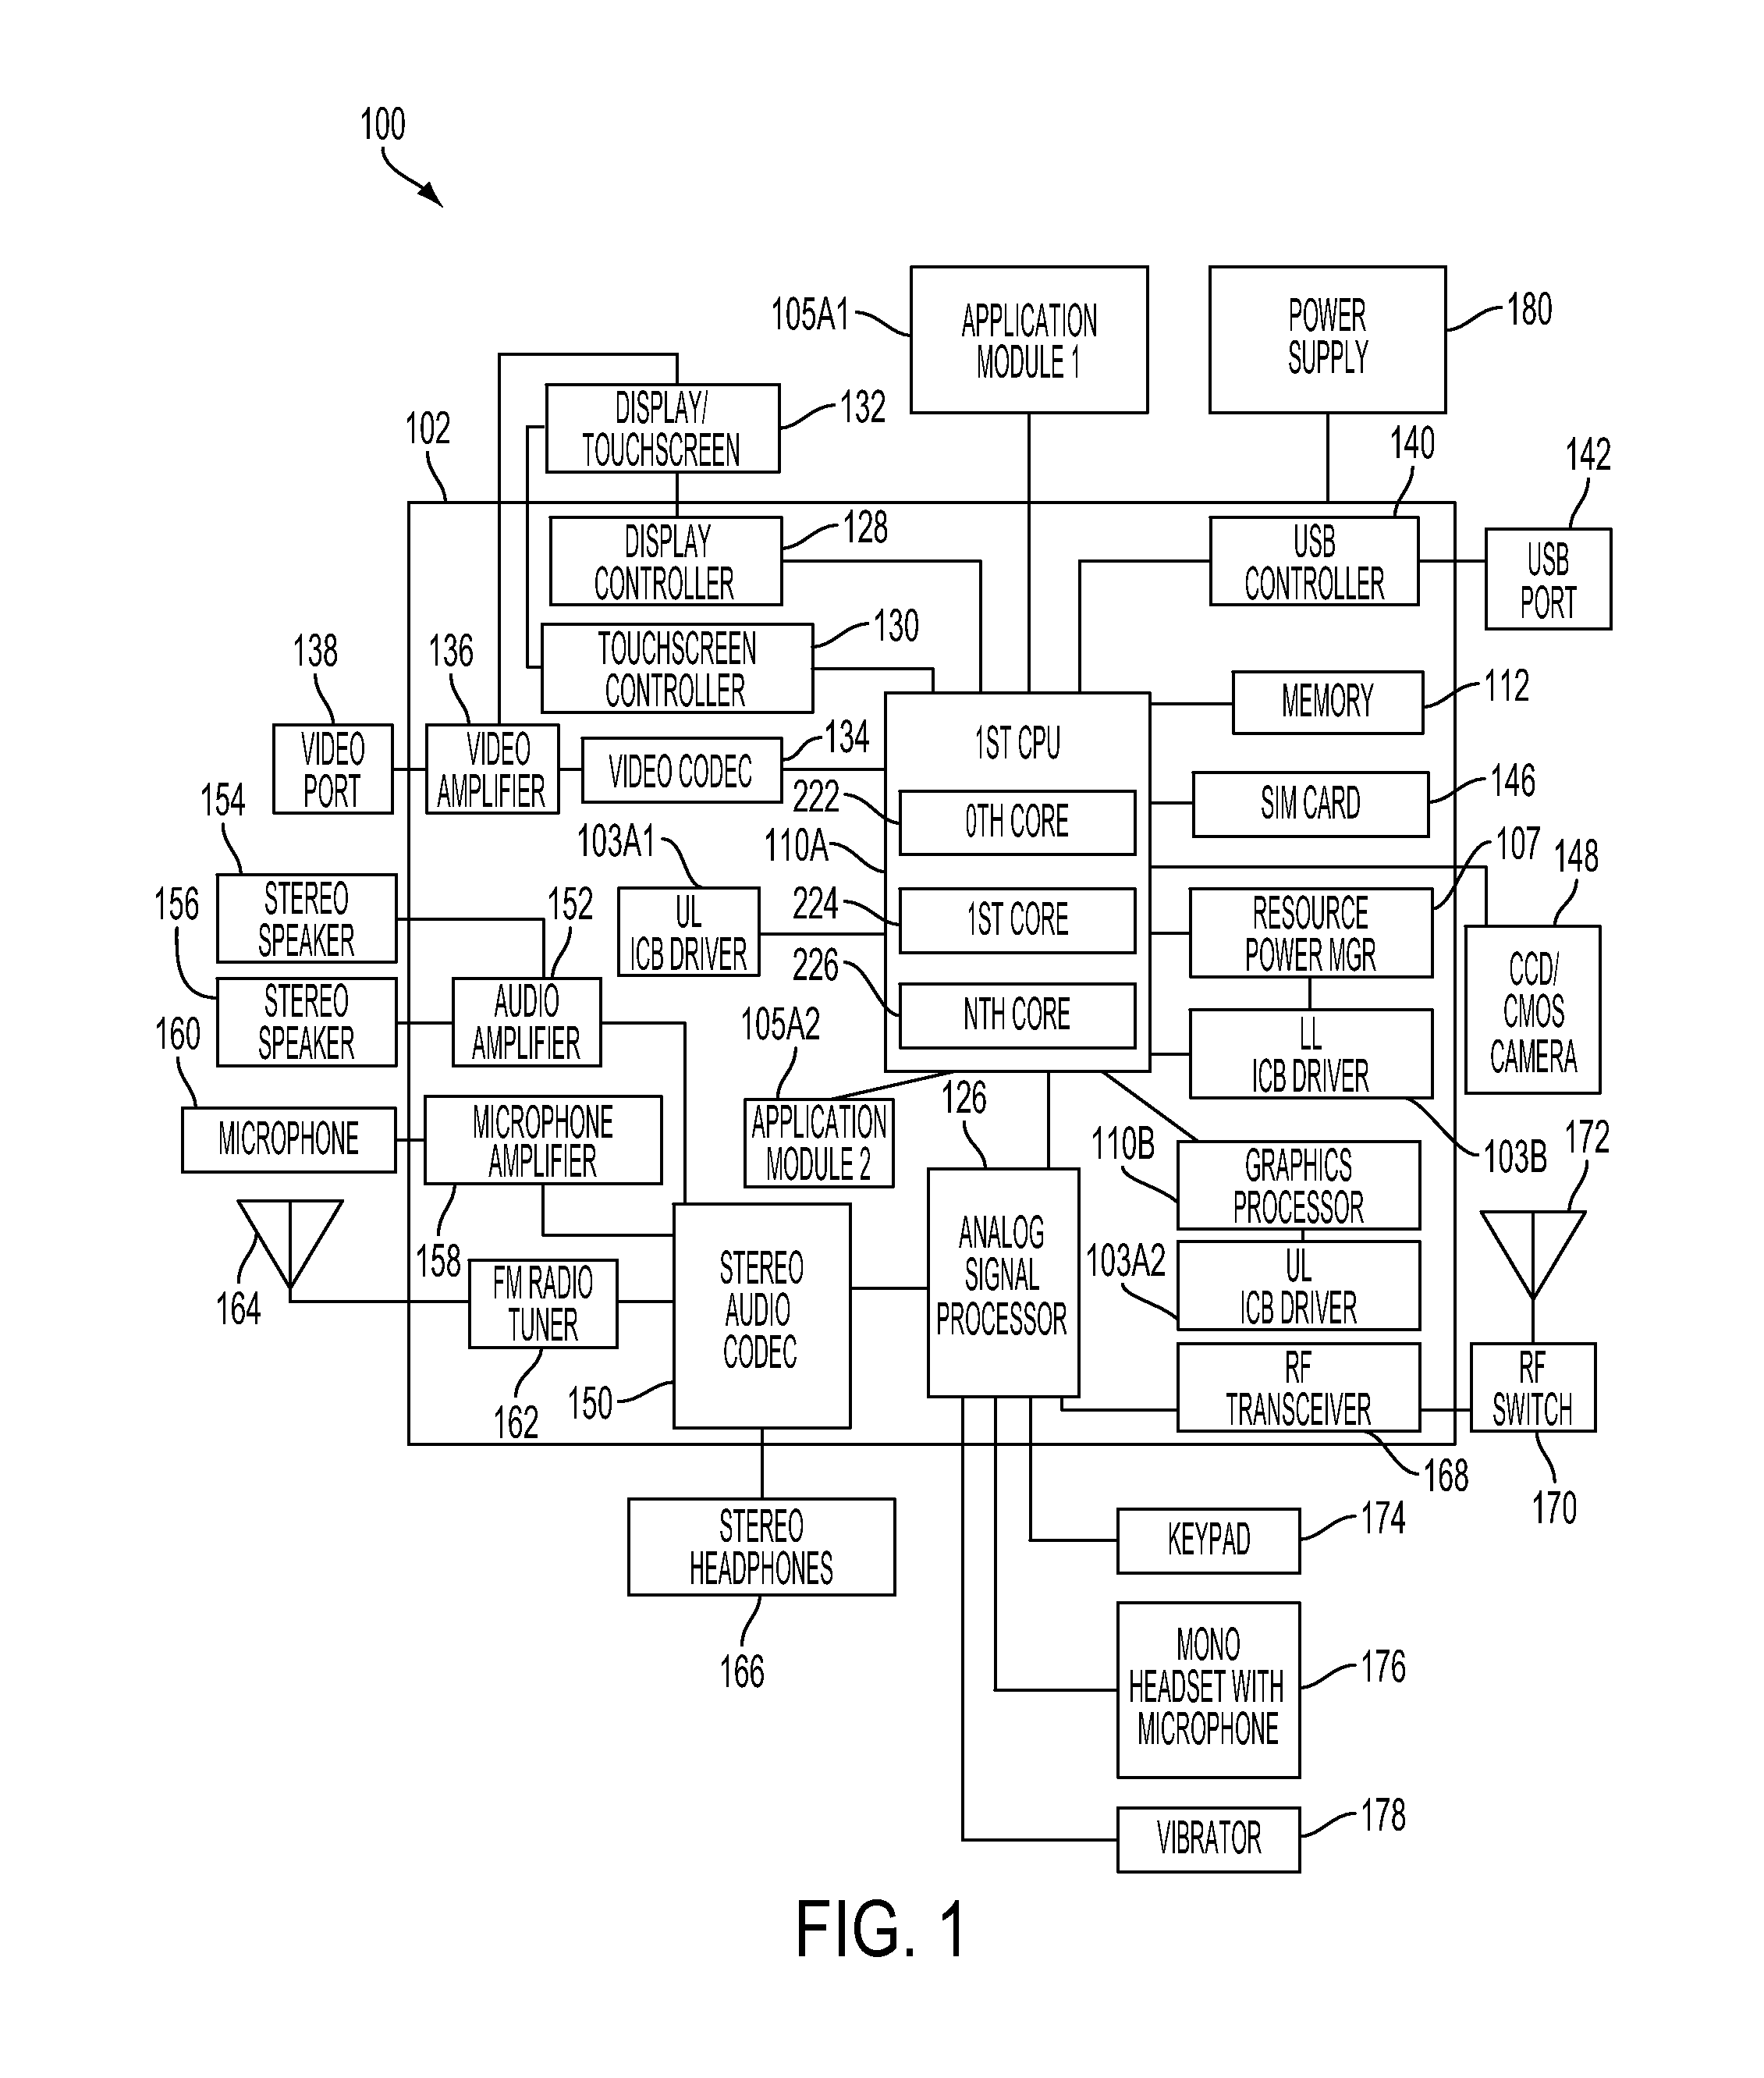 Method and system for dynamically creating and servicing master-slave pairs within and across switch fabrics of a portable computing device